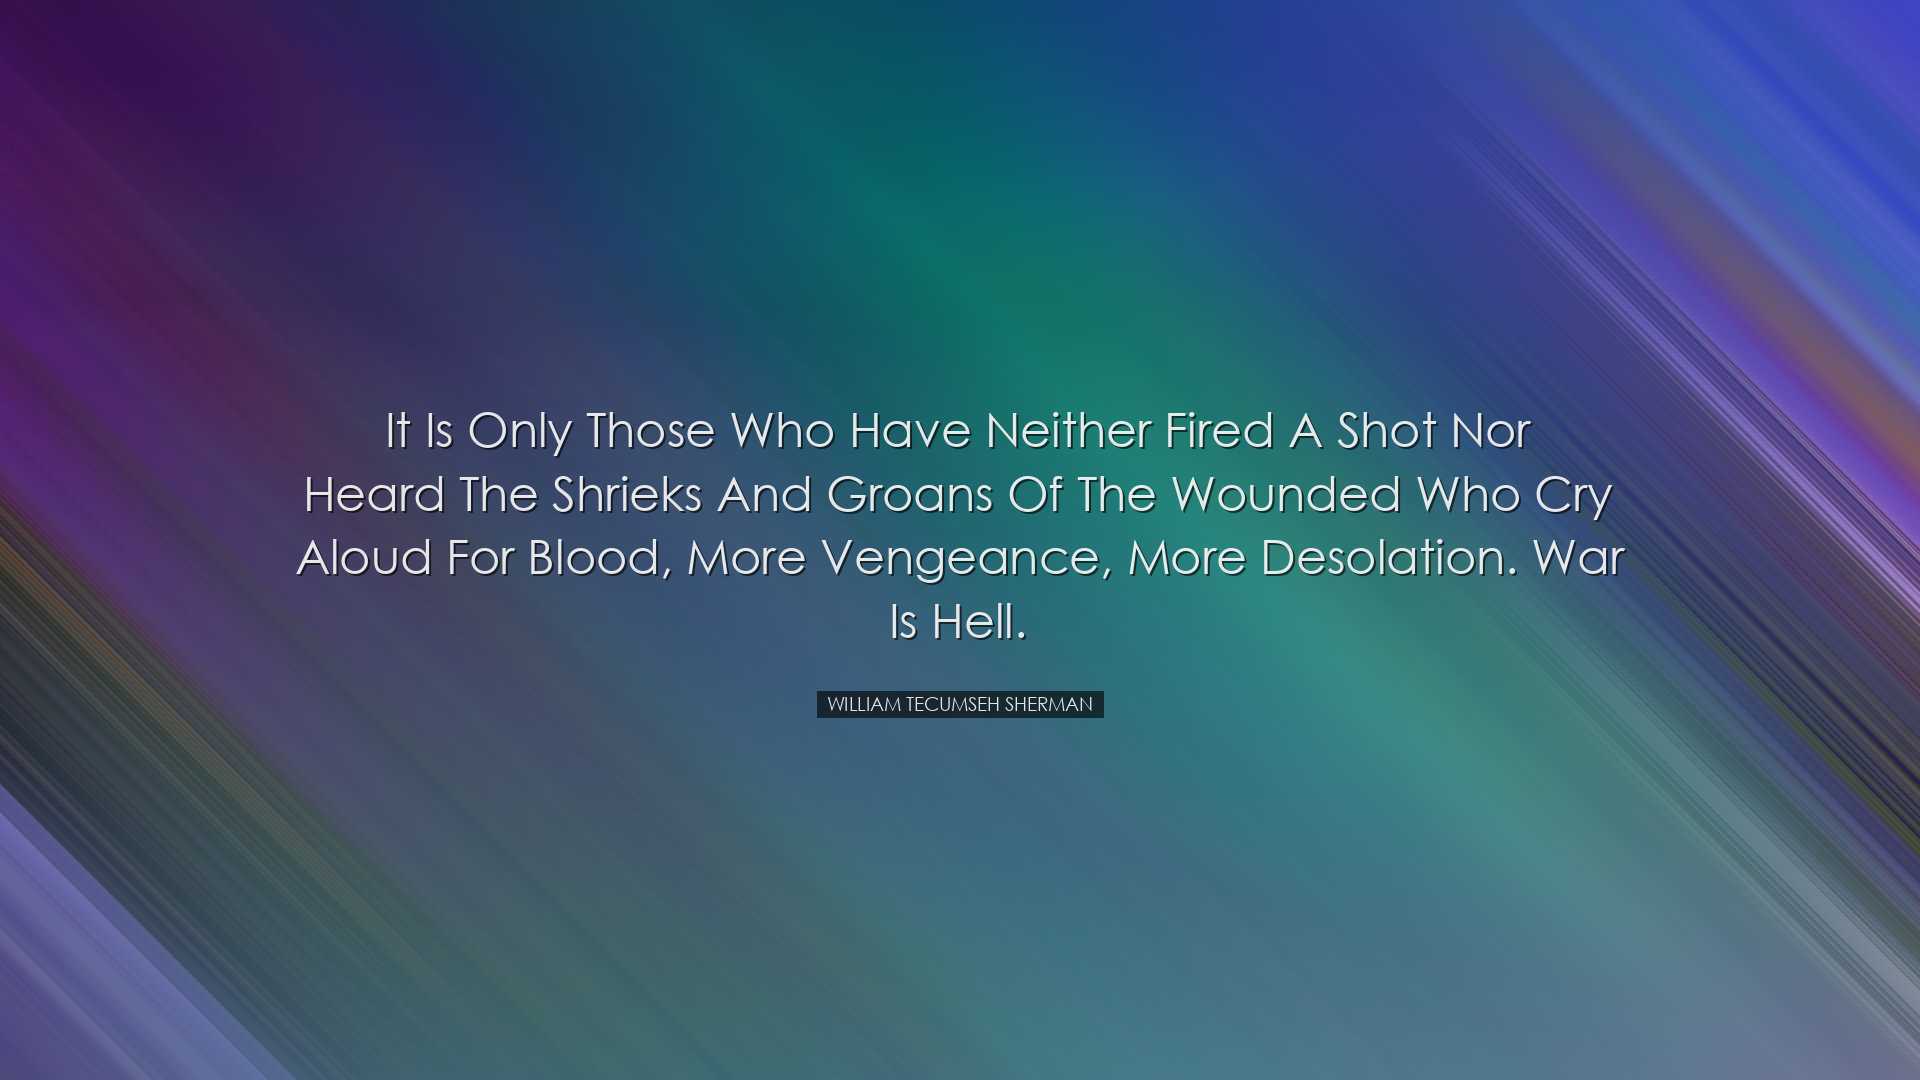 It is only those who have neither fired a shot nor heard the shrie